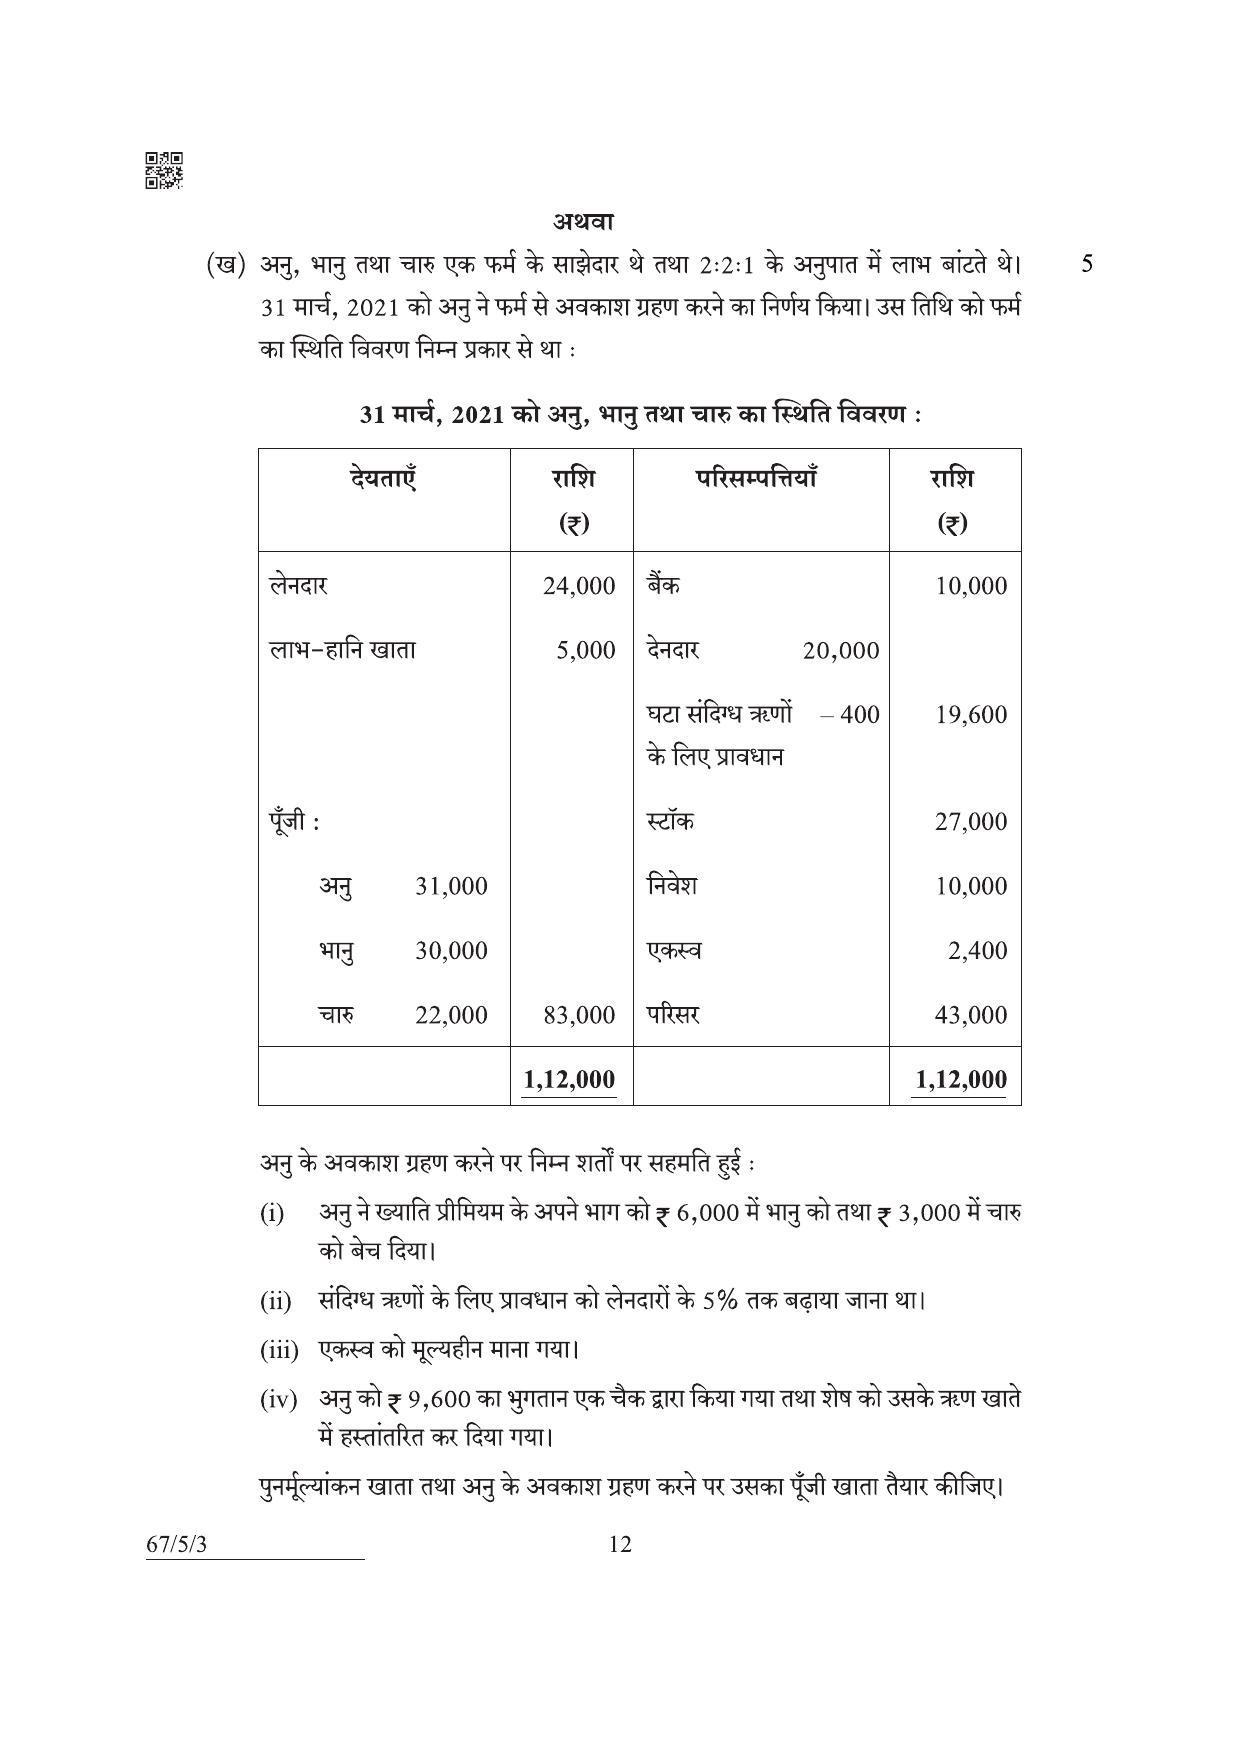 CBSE Class 12 67-5-3 Accountancy 2022 Question Paper - Page 12